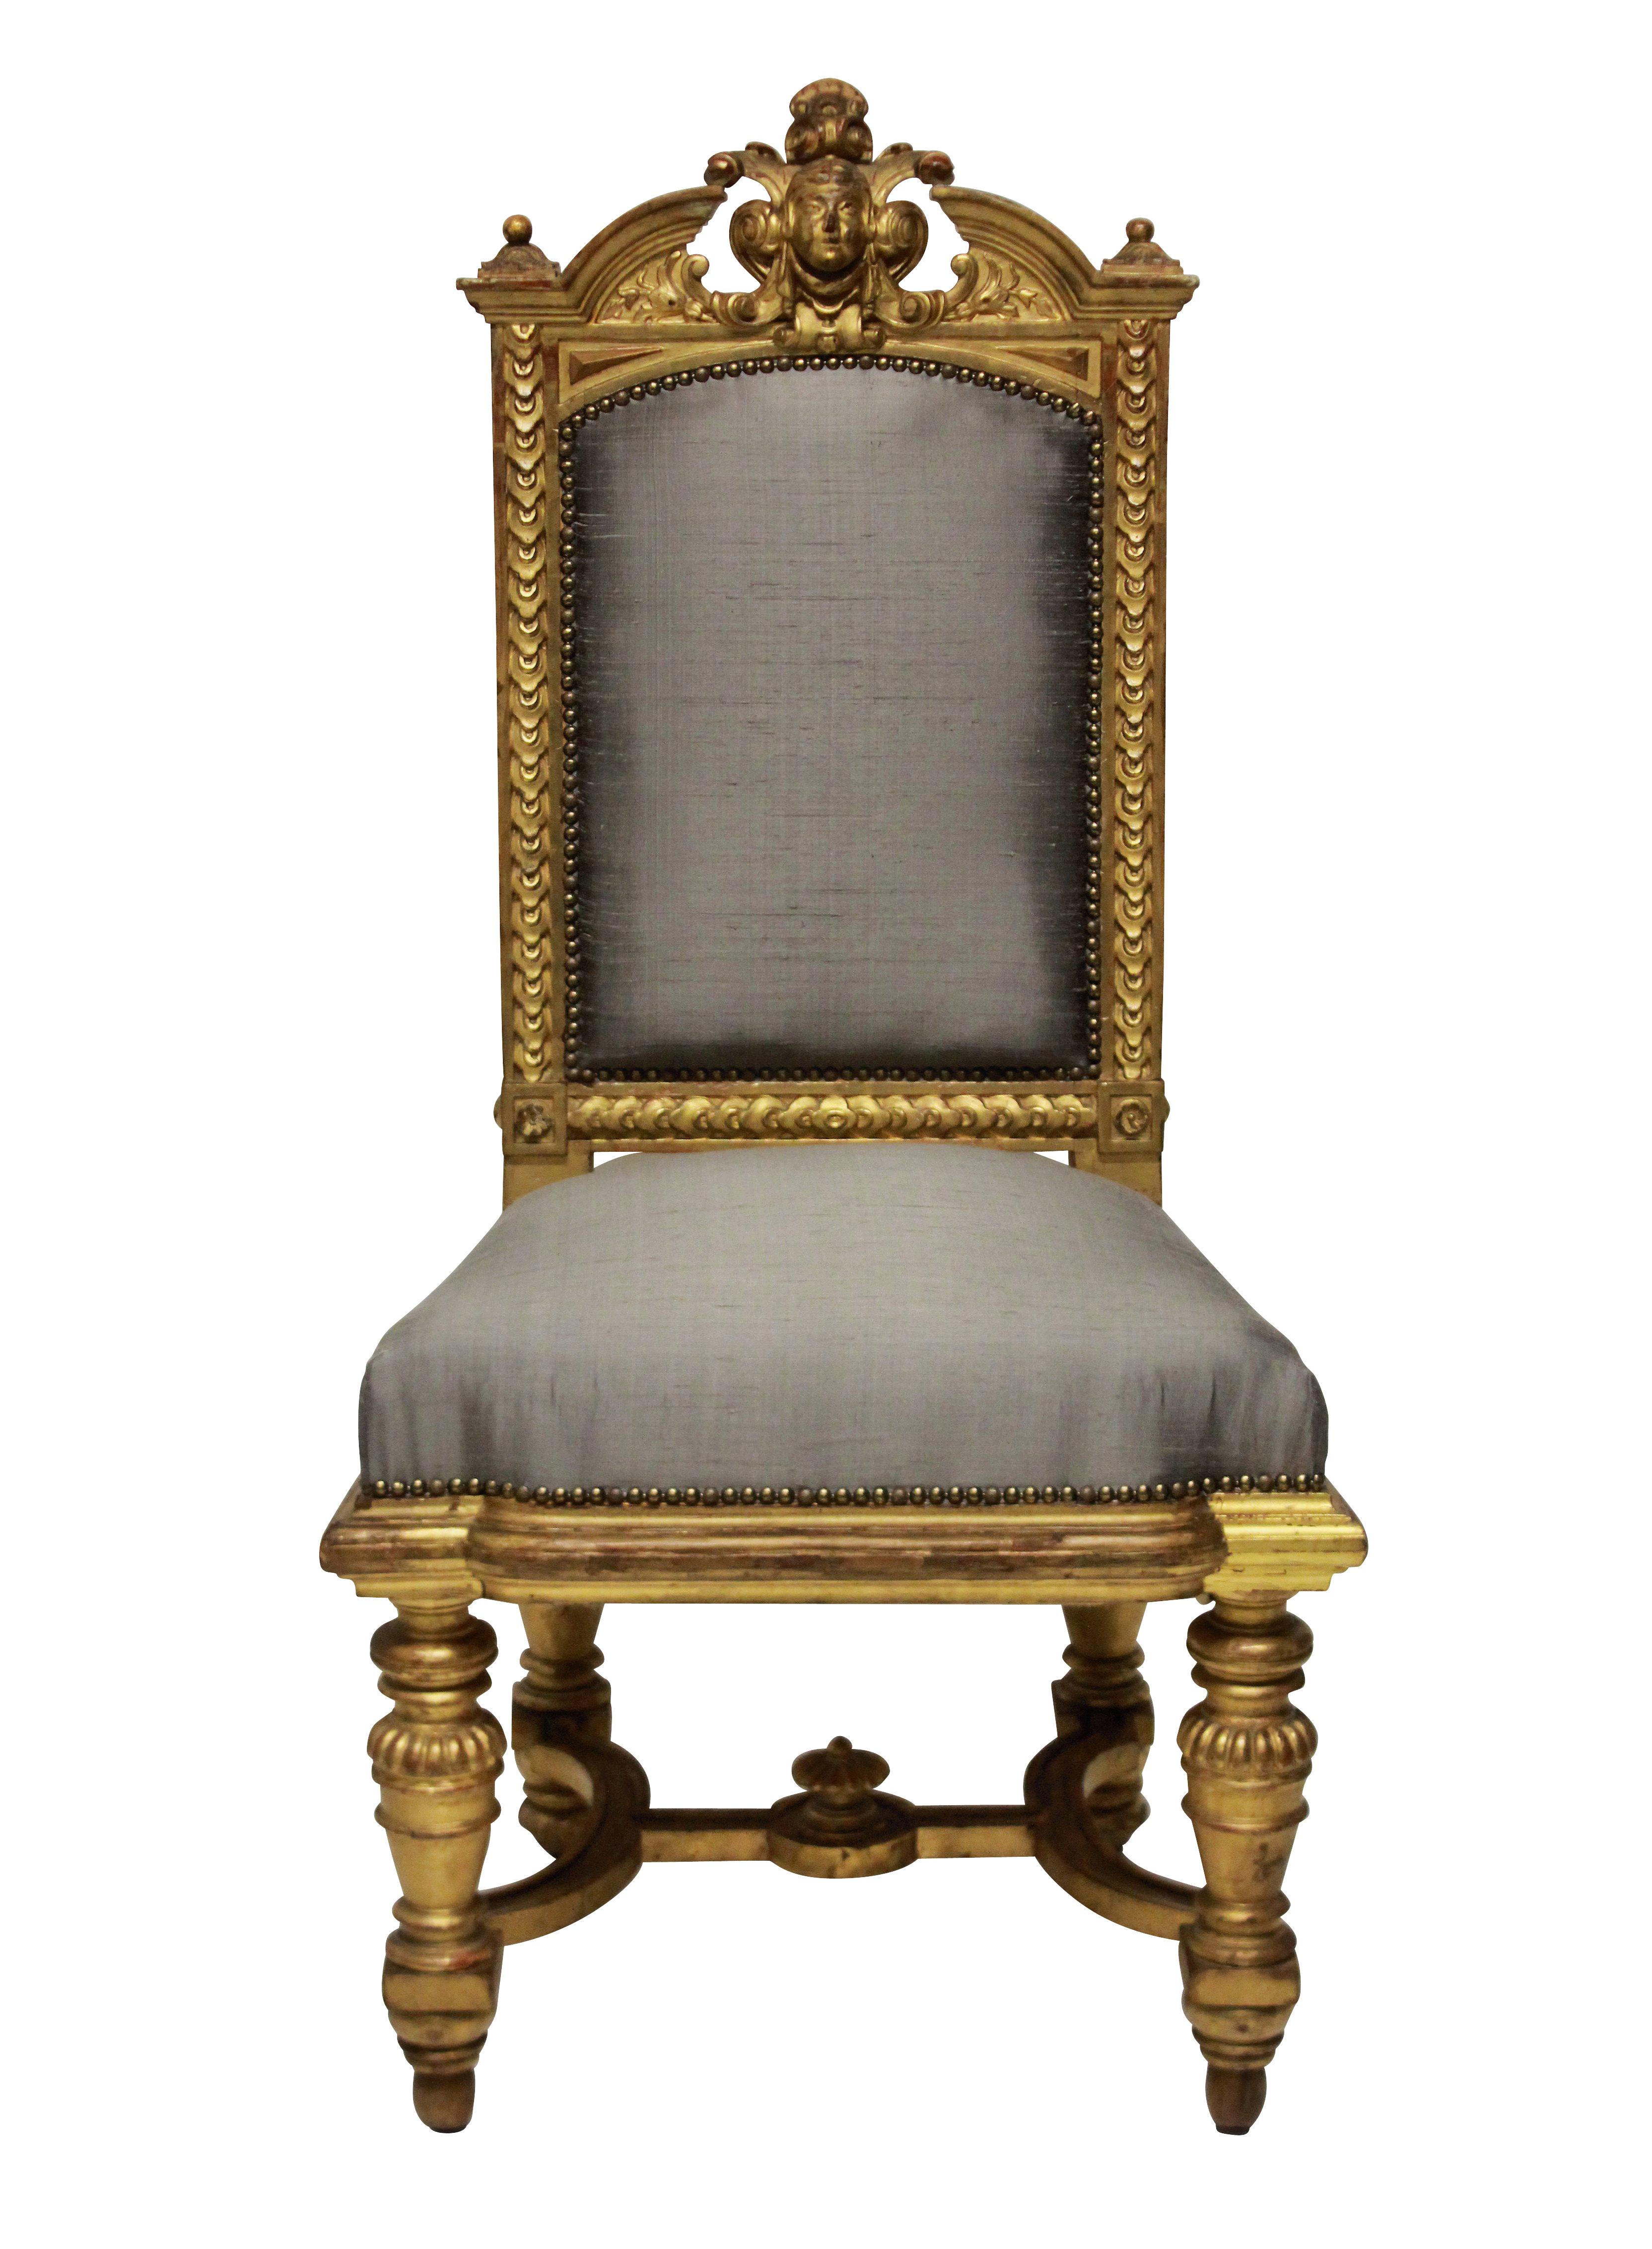 A pair of fine French Napoleon III water gilded chairs, beautifully carved and turned, with central female classical masks and burnished throughout. Newly upholstered in stone colored silk.

 